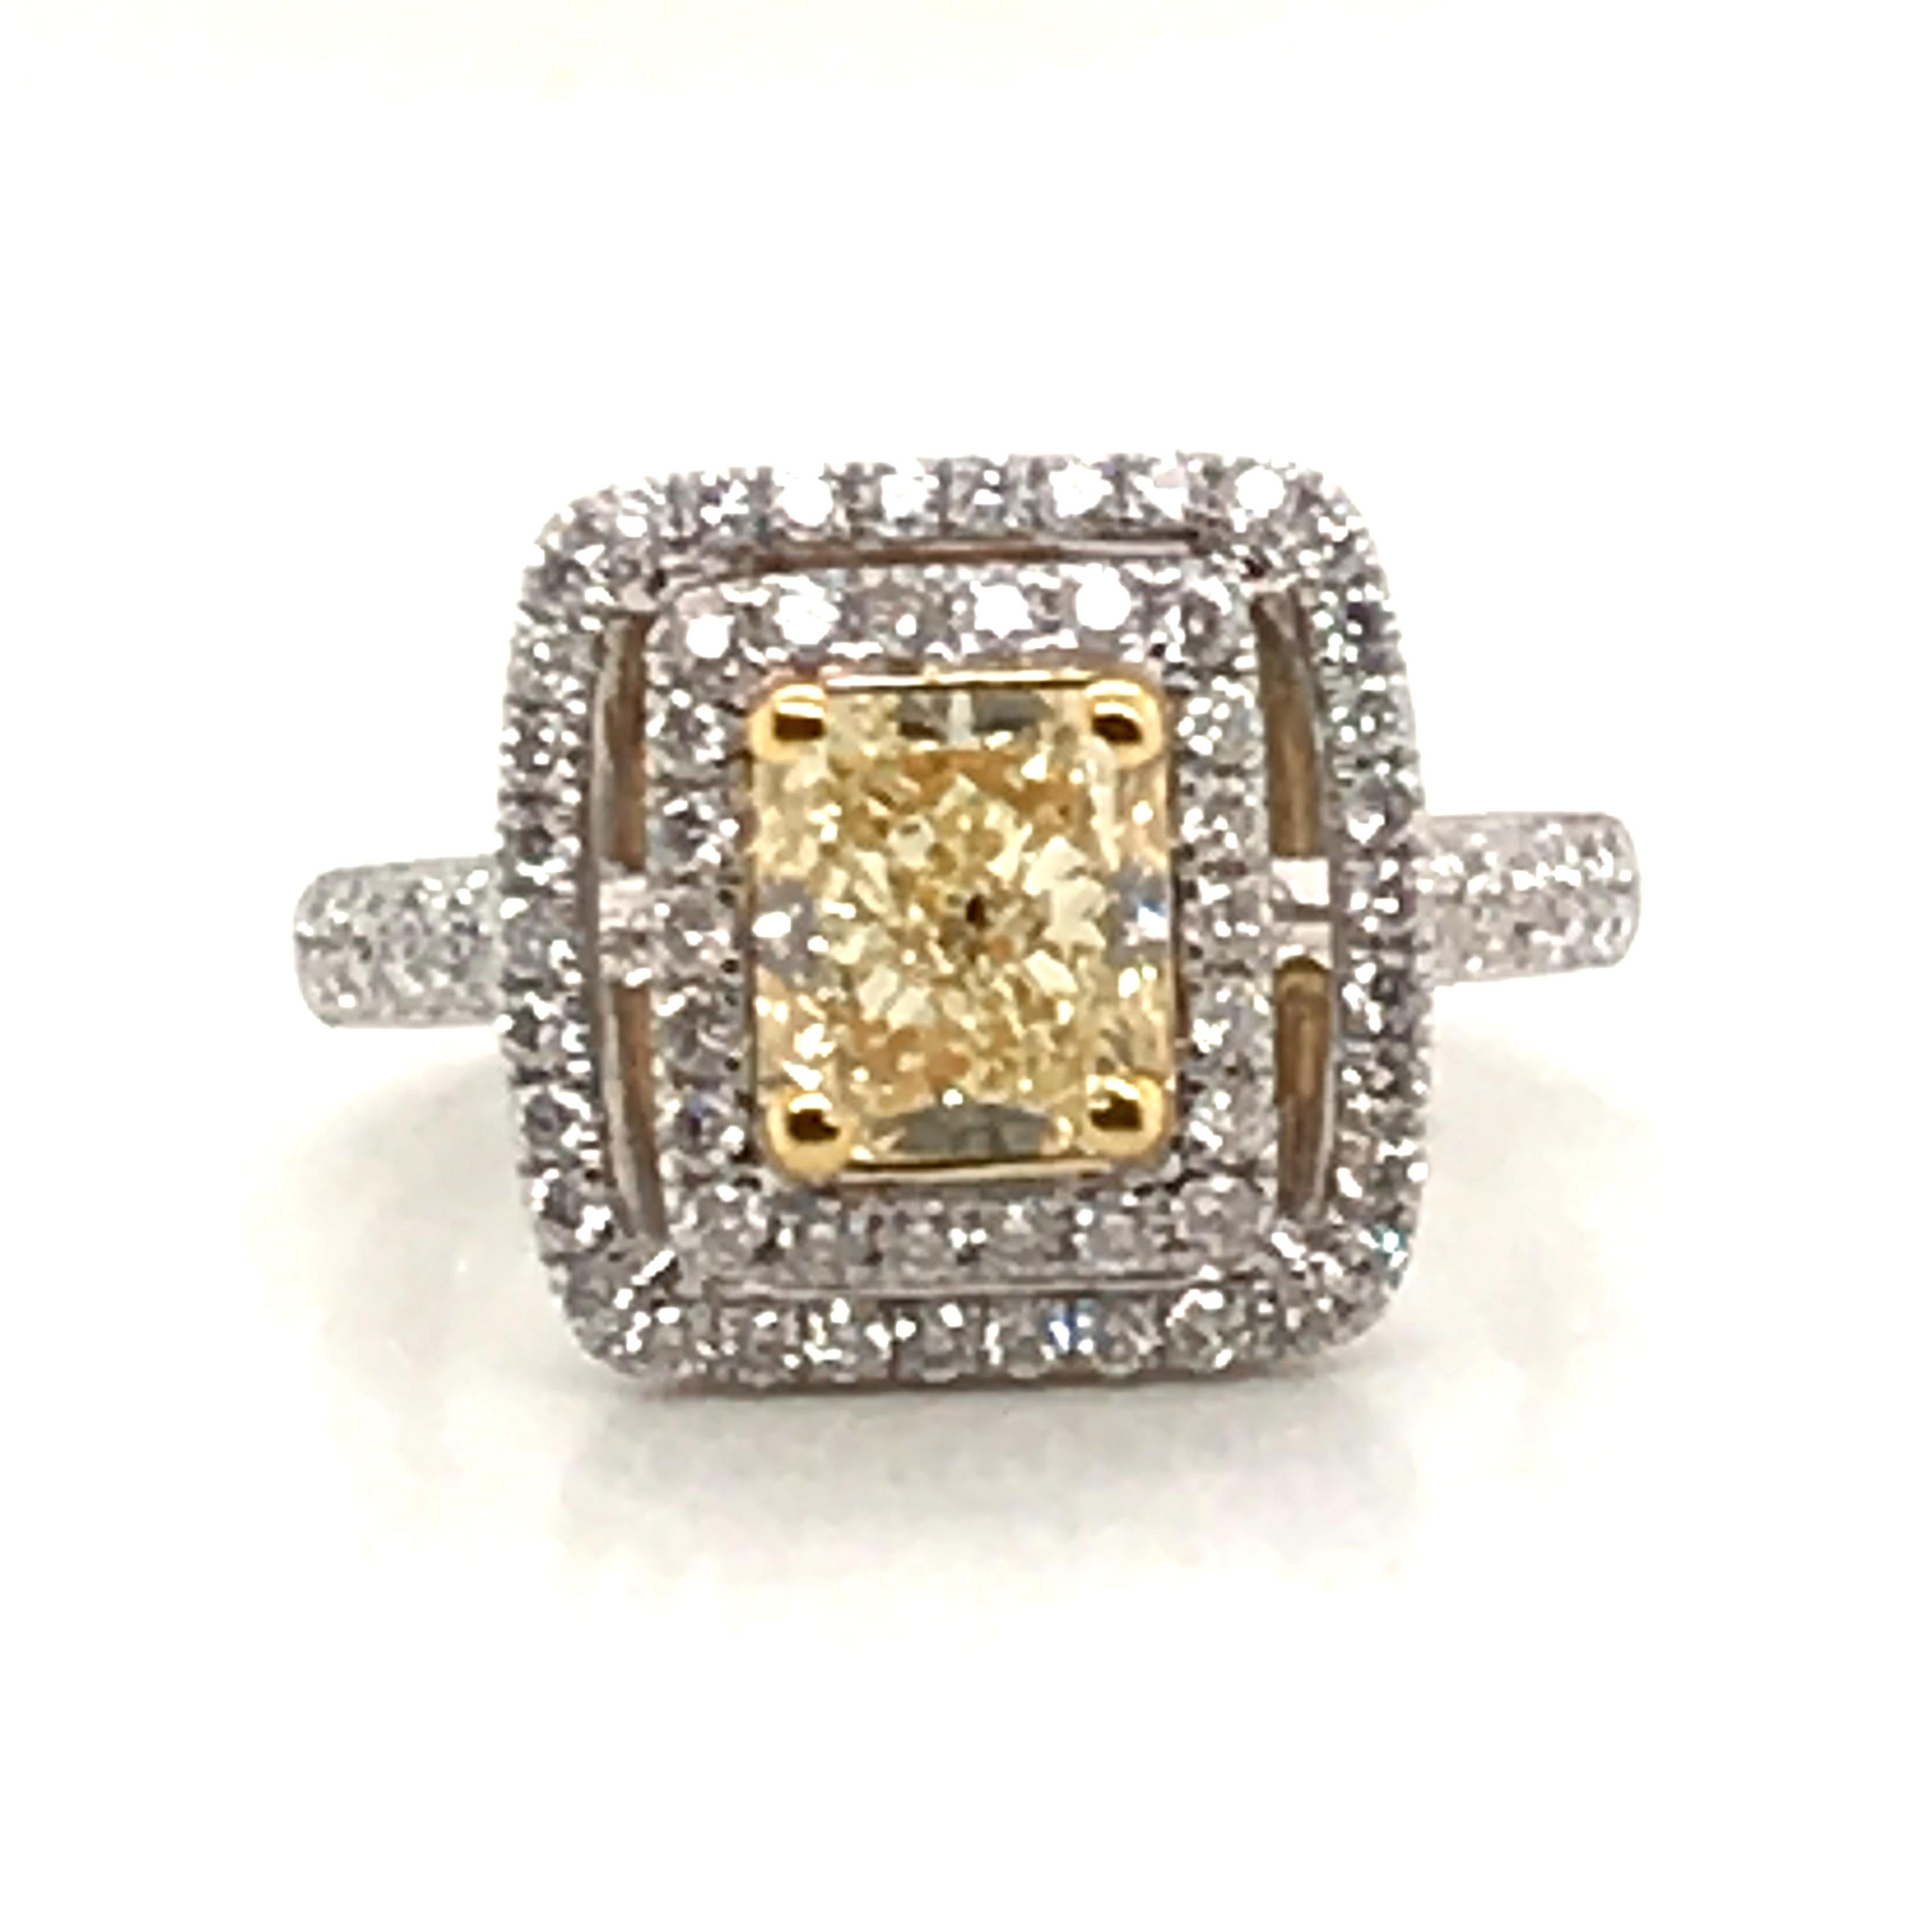 HJN Inc. Ring featuring a 2.11 Carat Natural Fancy Yellow Diamond Ring with 18K White and Yellow Gold

Natural Fancy Yellow Diamond: 1.51 Carats
Round-Cut Diamond Weight: 0.60 Carats

Total Stones: 80
Clarity Grade: SI1
Color Grade: H
Total Diamond